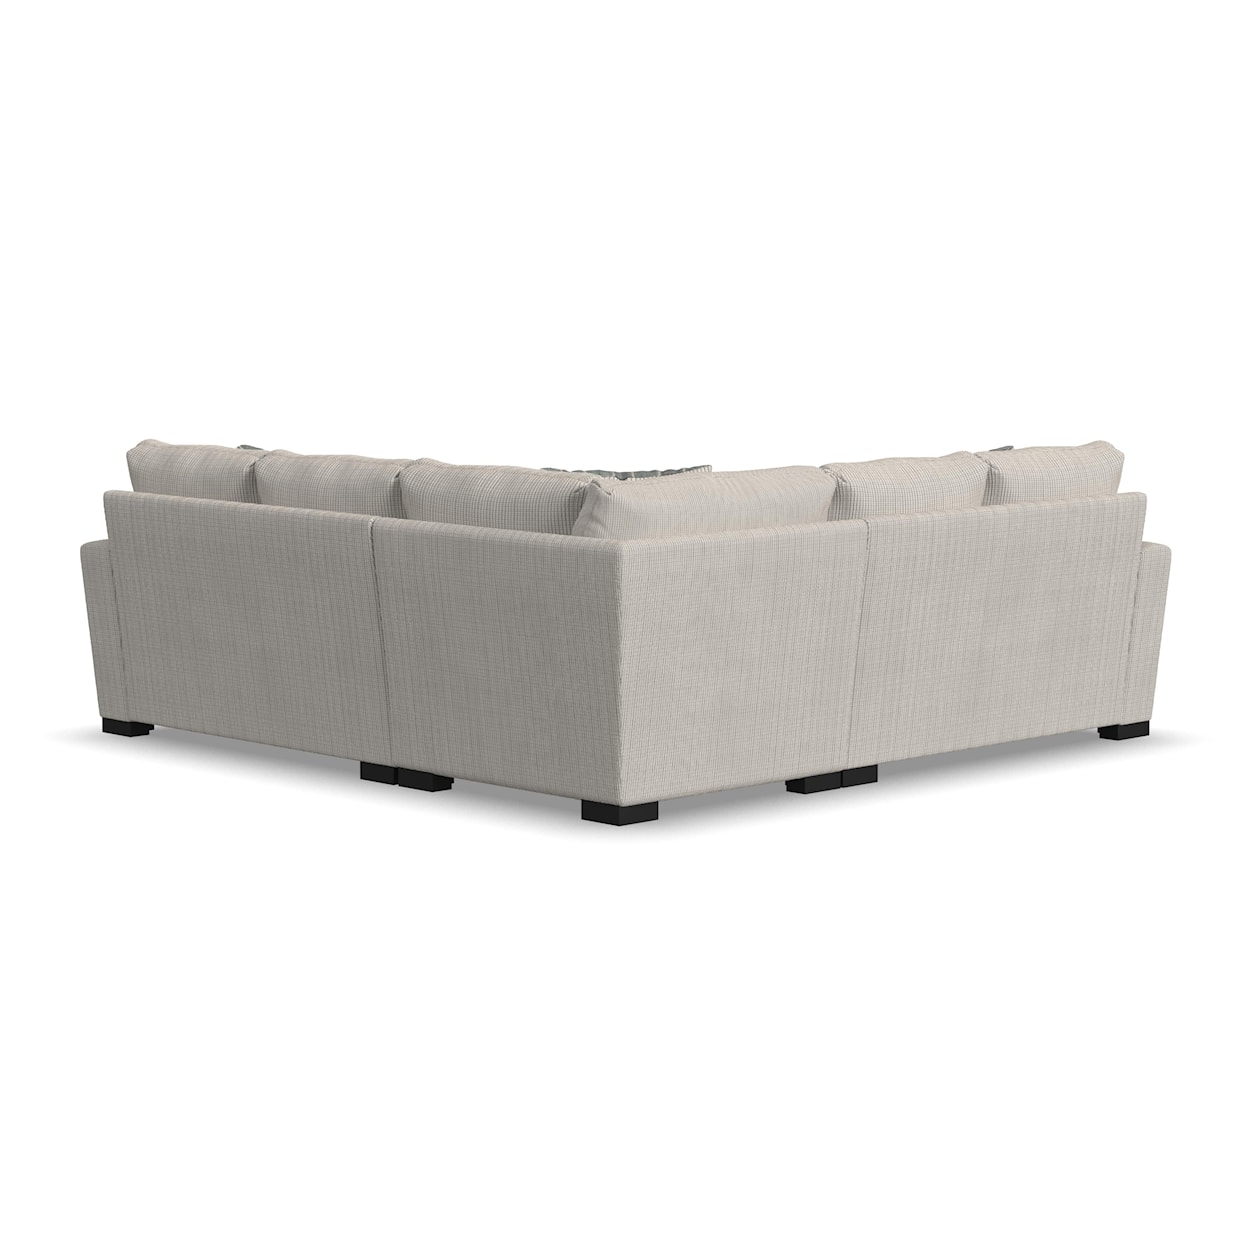 Flexsteel Charisma -Theodore L-Shaped Sectional